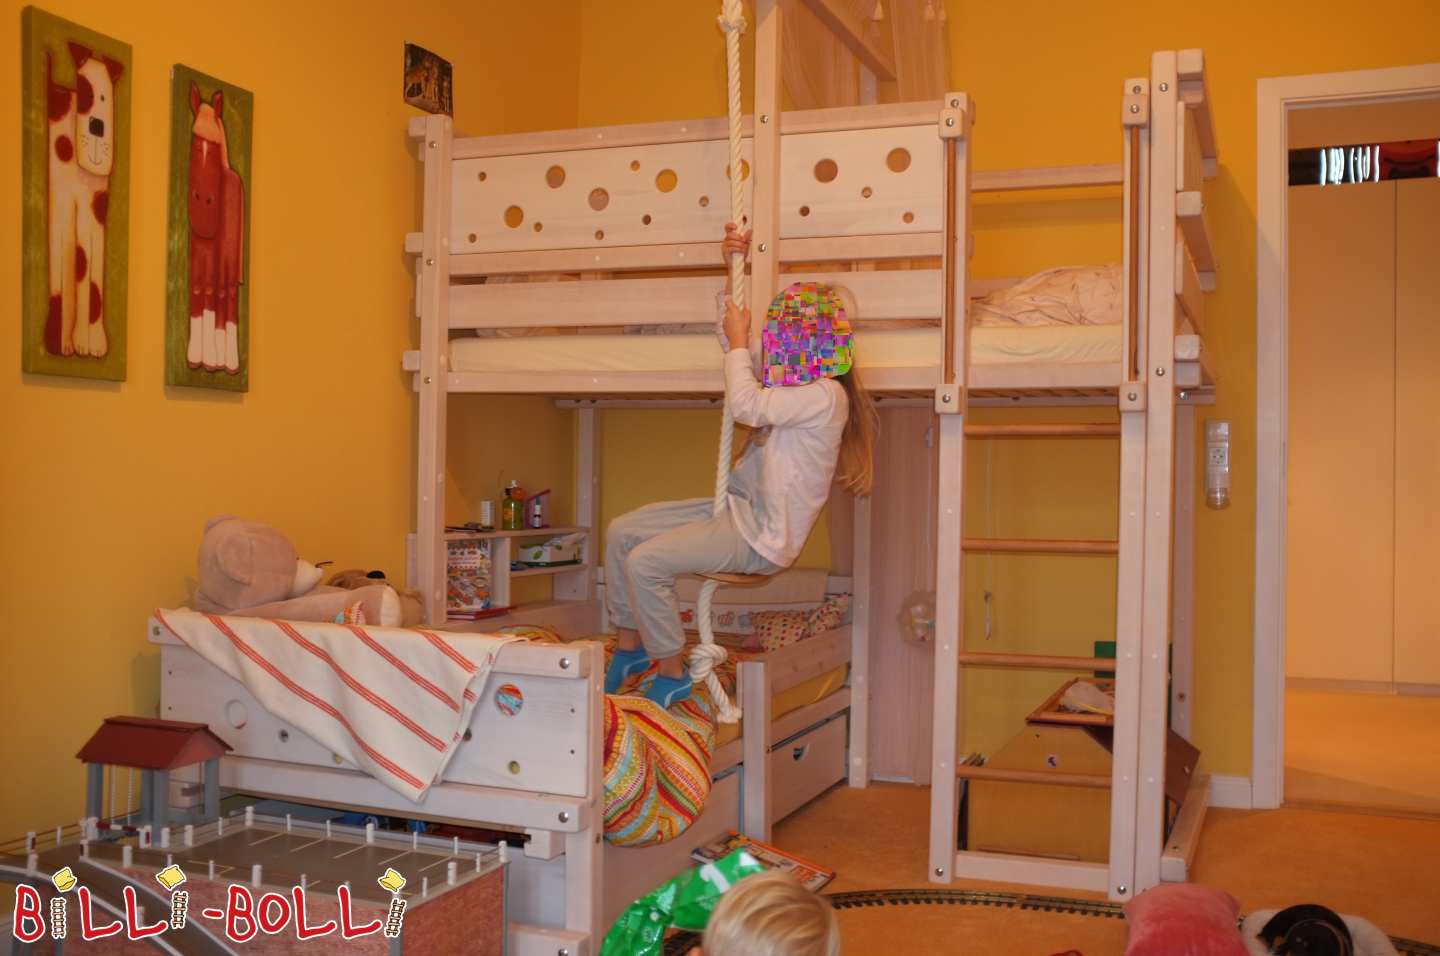 Growing corner bunk bed with mice-themed boards and swing (Category: Accessories/extension parts pre-owned)